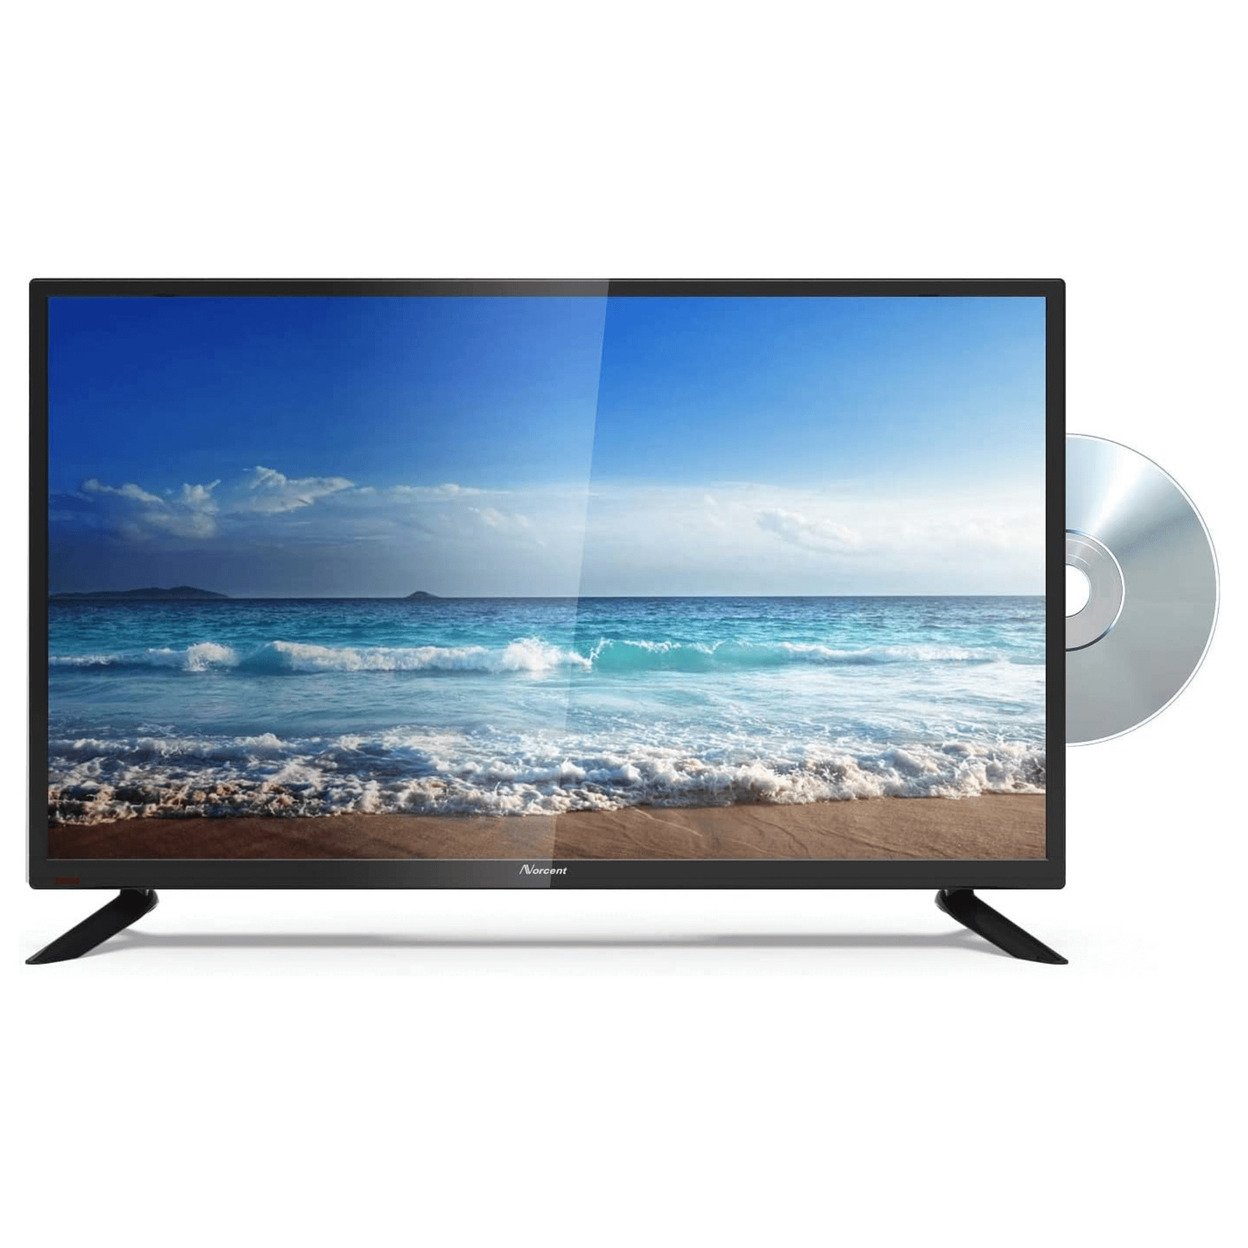 Norcent 32 Inch 720P LED HD Backlight Flat TV DVD Combo With Full Range Speakers